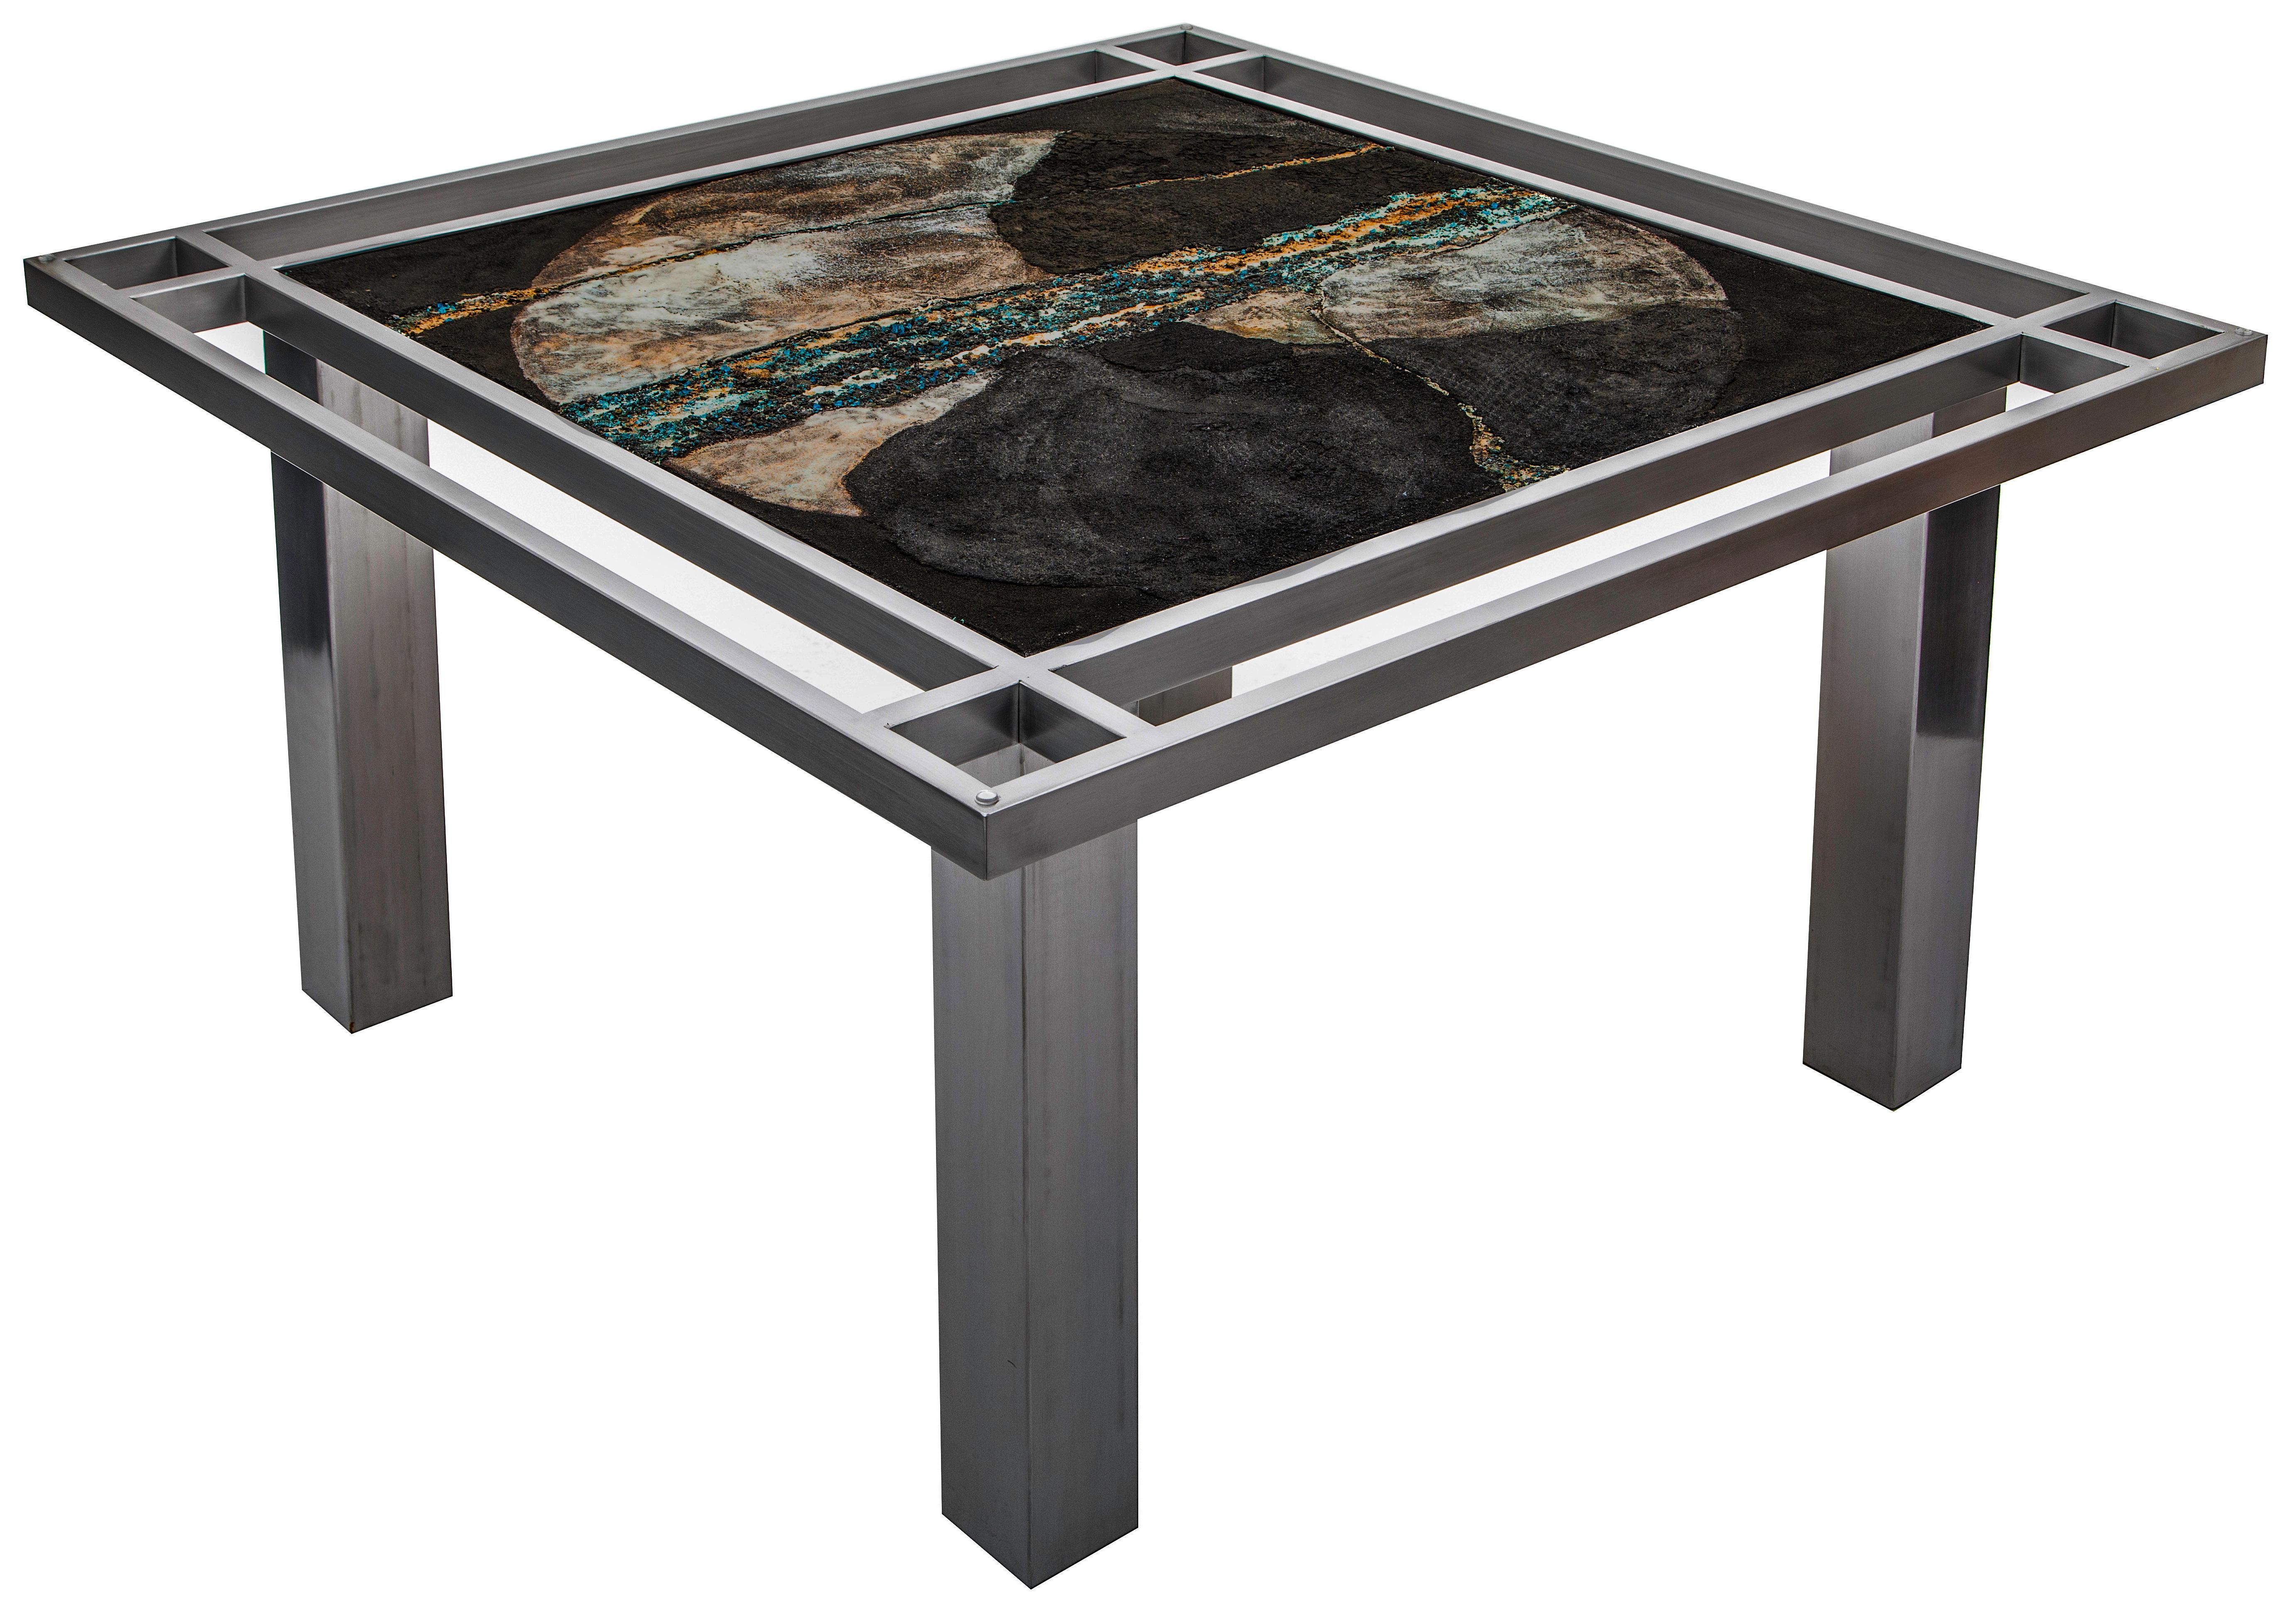 “Once in a Blue Moon” is a one-of-a-kind table designed and manufactured by KalaRara. The tabletop is created on canvas using a palette applied composite of pulverised Ligurian black marble mixed with crushed obsidian which has been stamped with